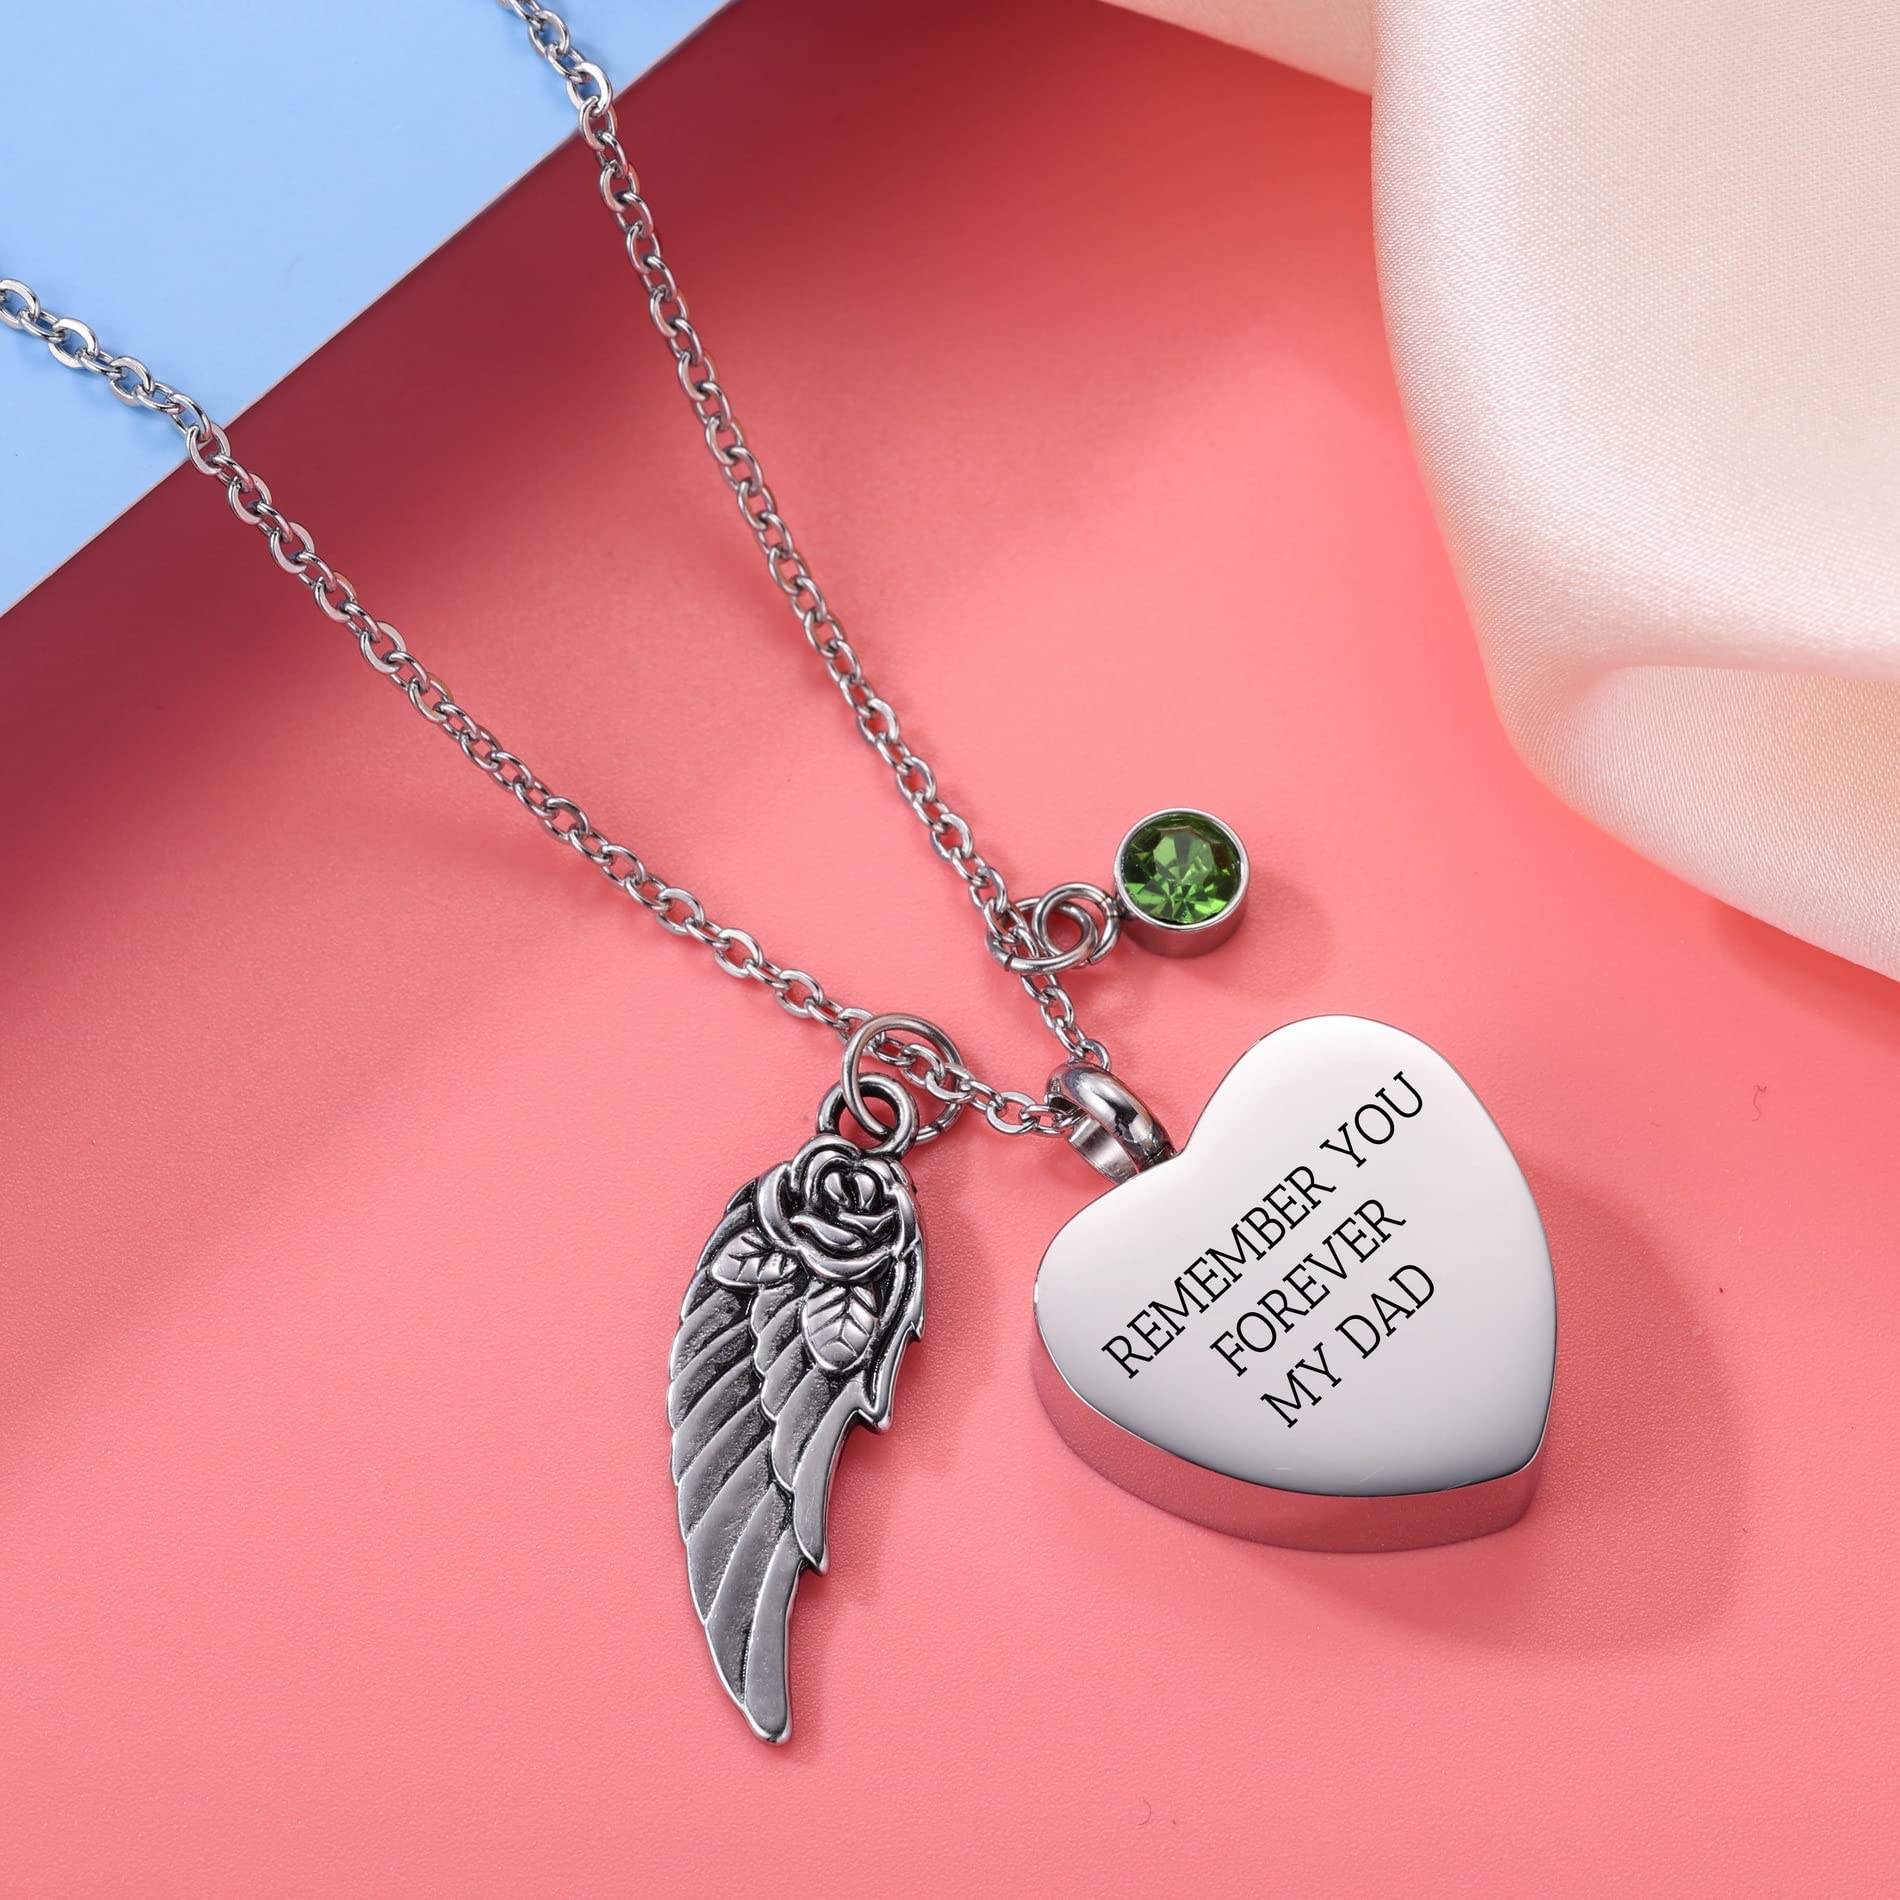 OTXIXTO Personalized Angel Wing Pendant Heart Urn Necklace Engraving Photo/Name for Men Women Girl with Birthstone Stainless Steel Pet Human Ashes Holder Memorial Keepsake Cremation Funnel Kit